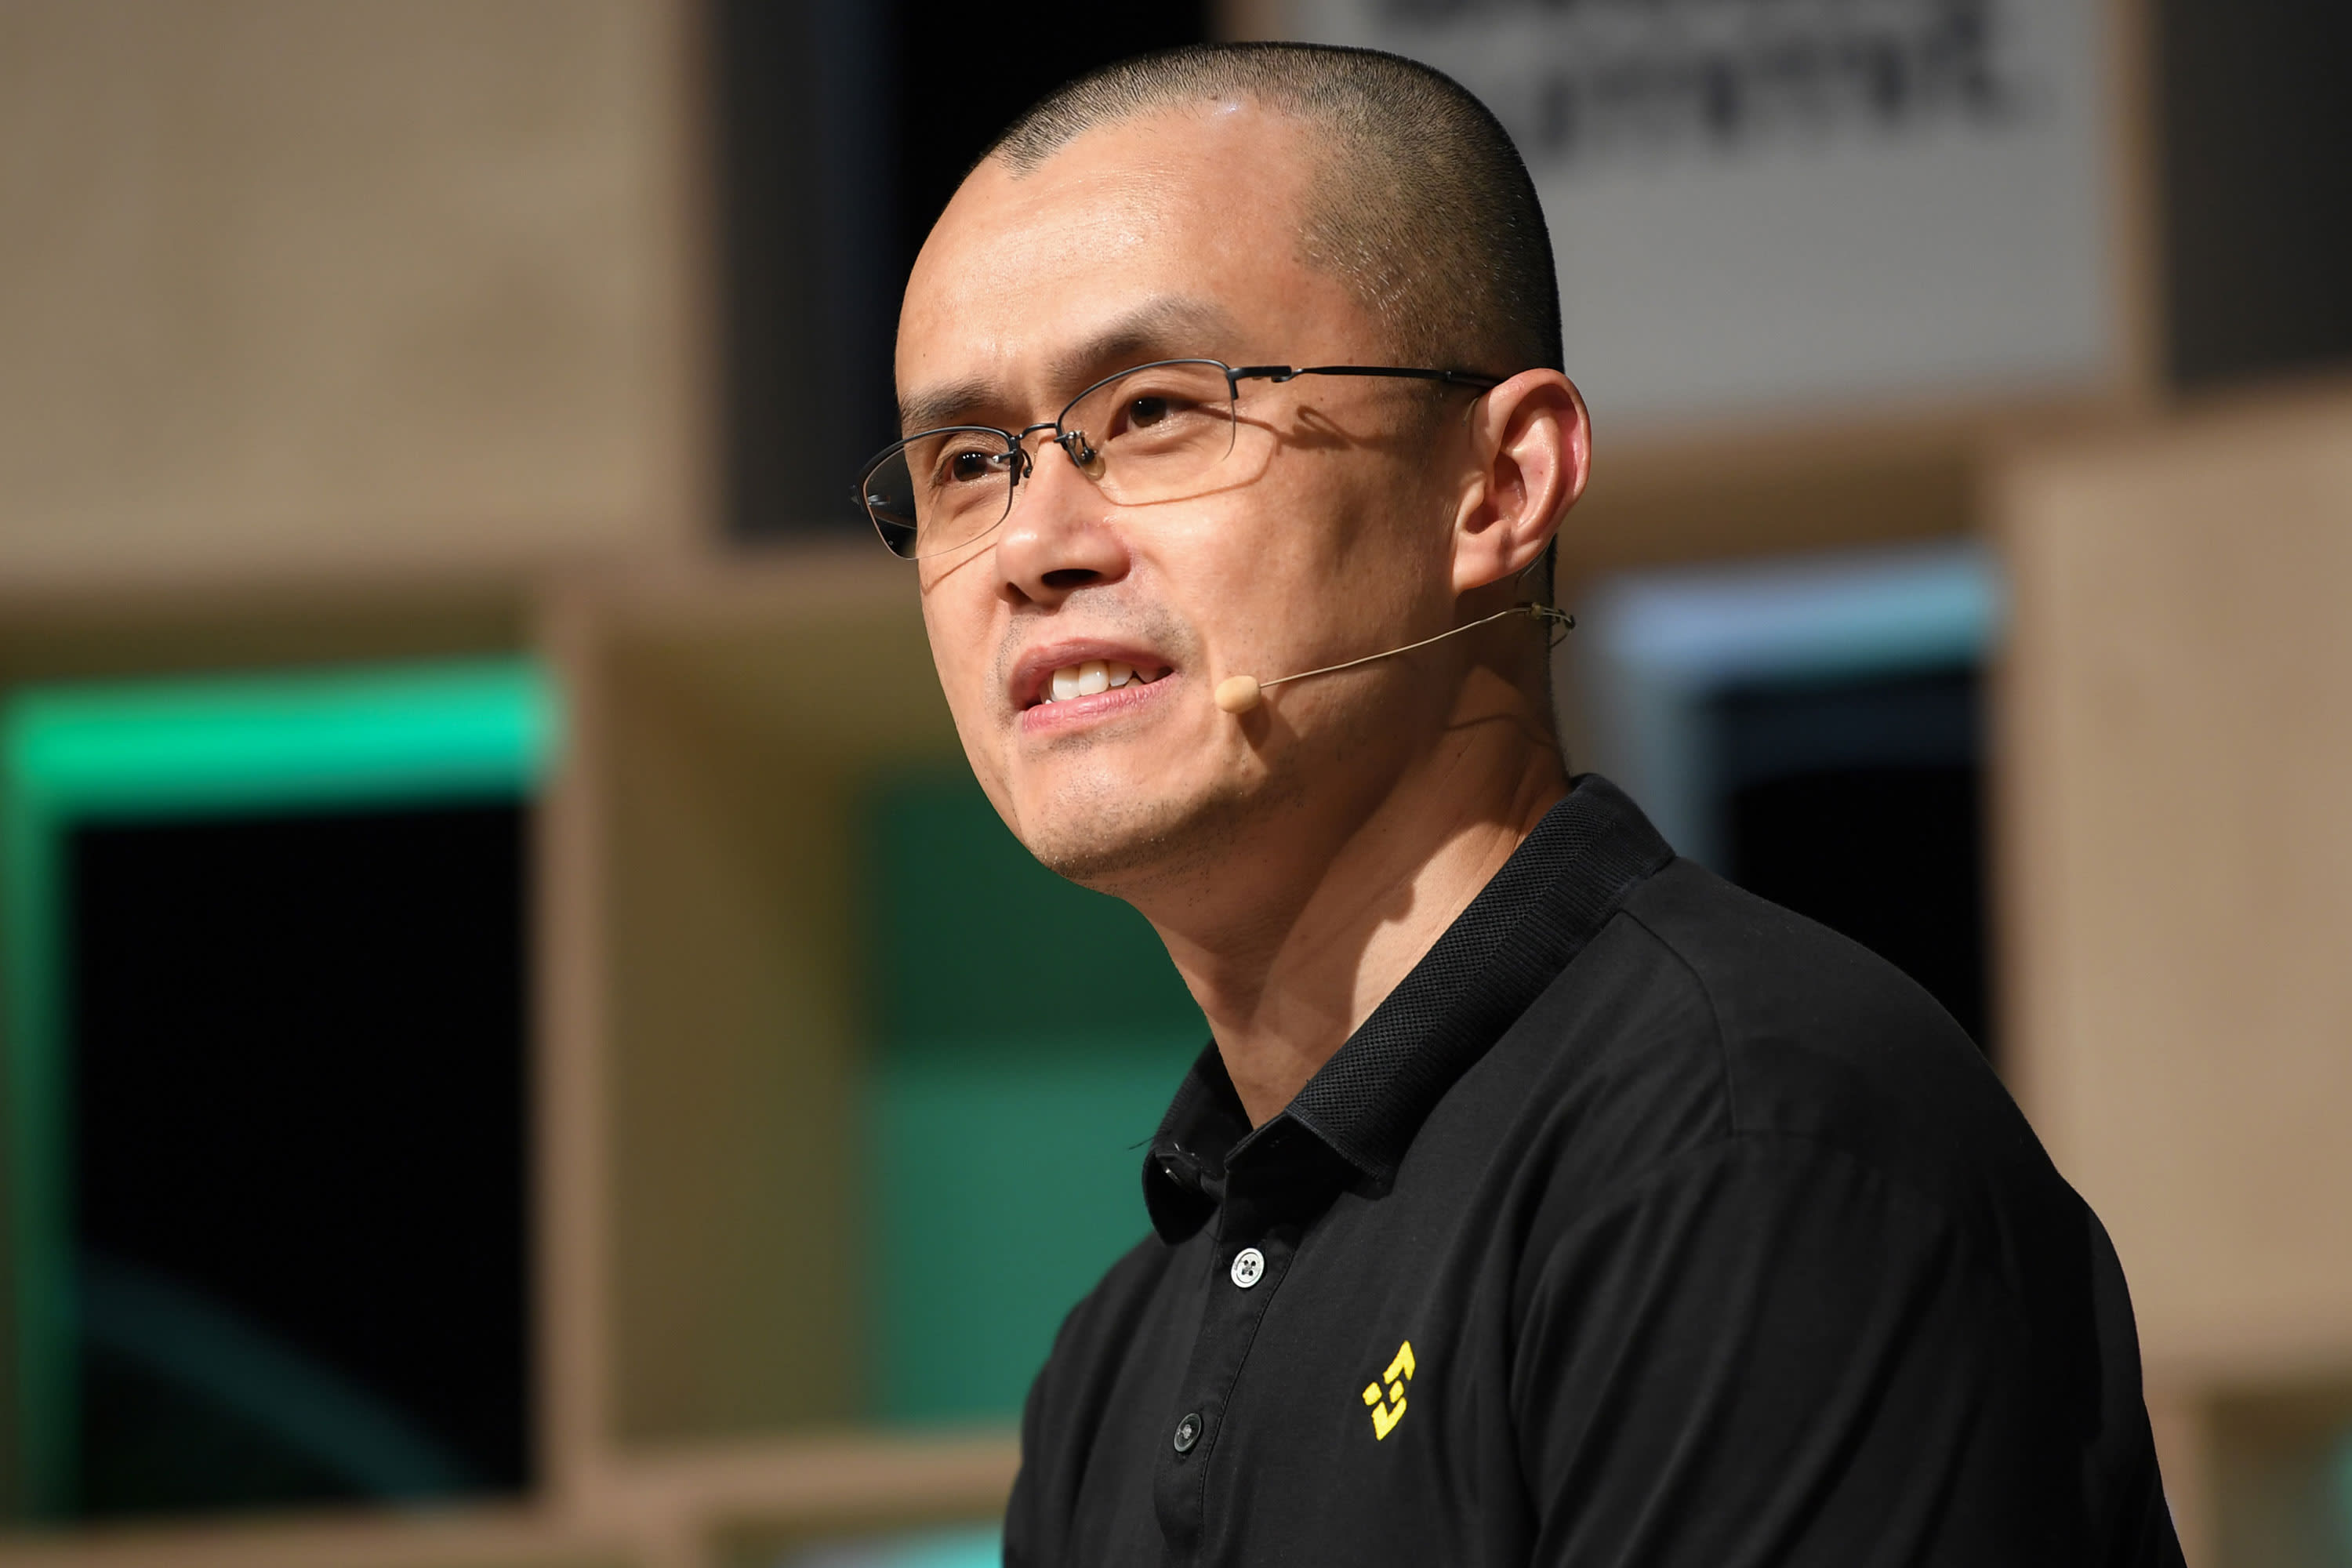 Binance CEO: Crypto will be fine, announces industry recovery fund